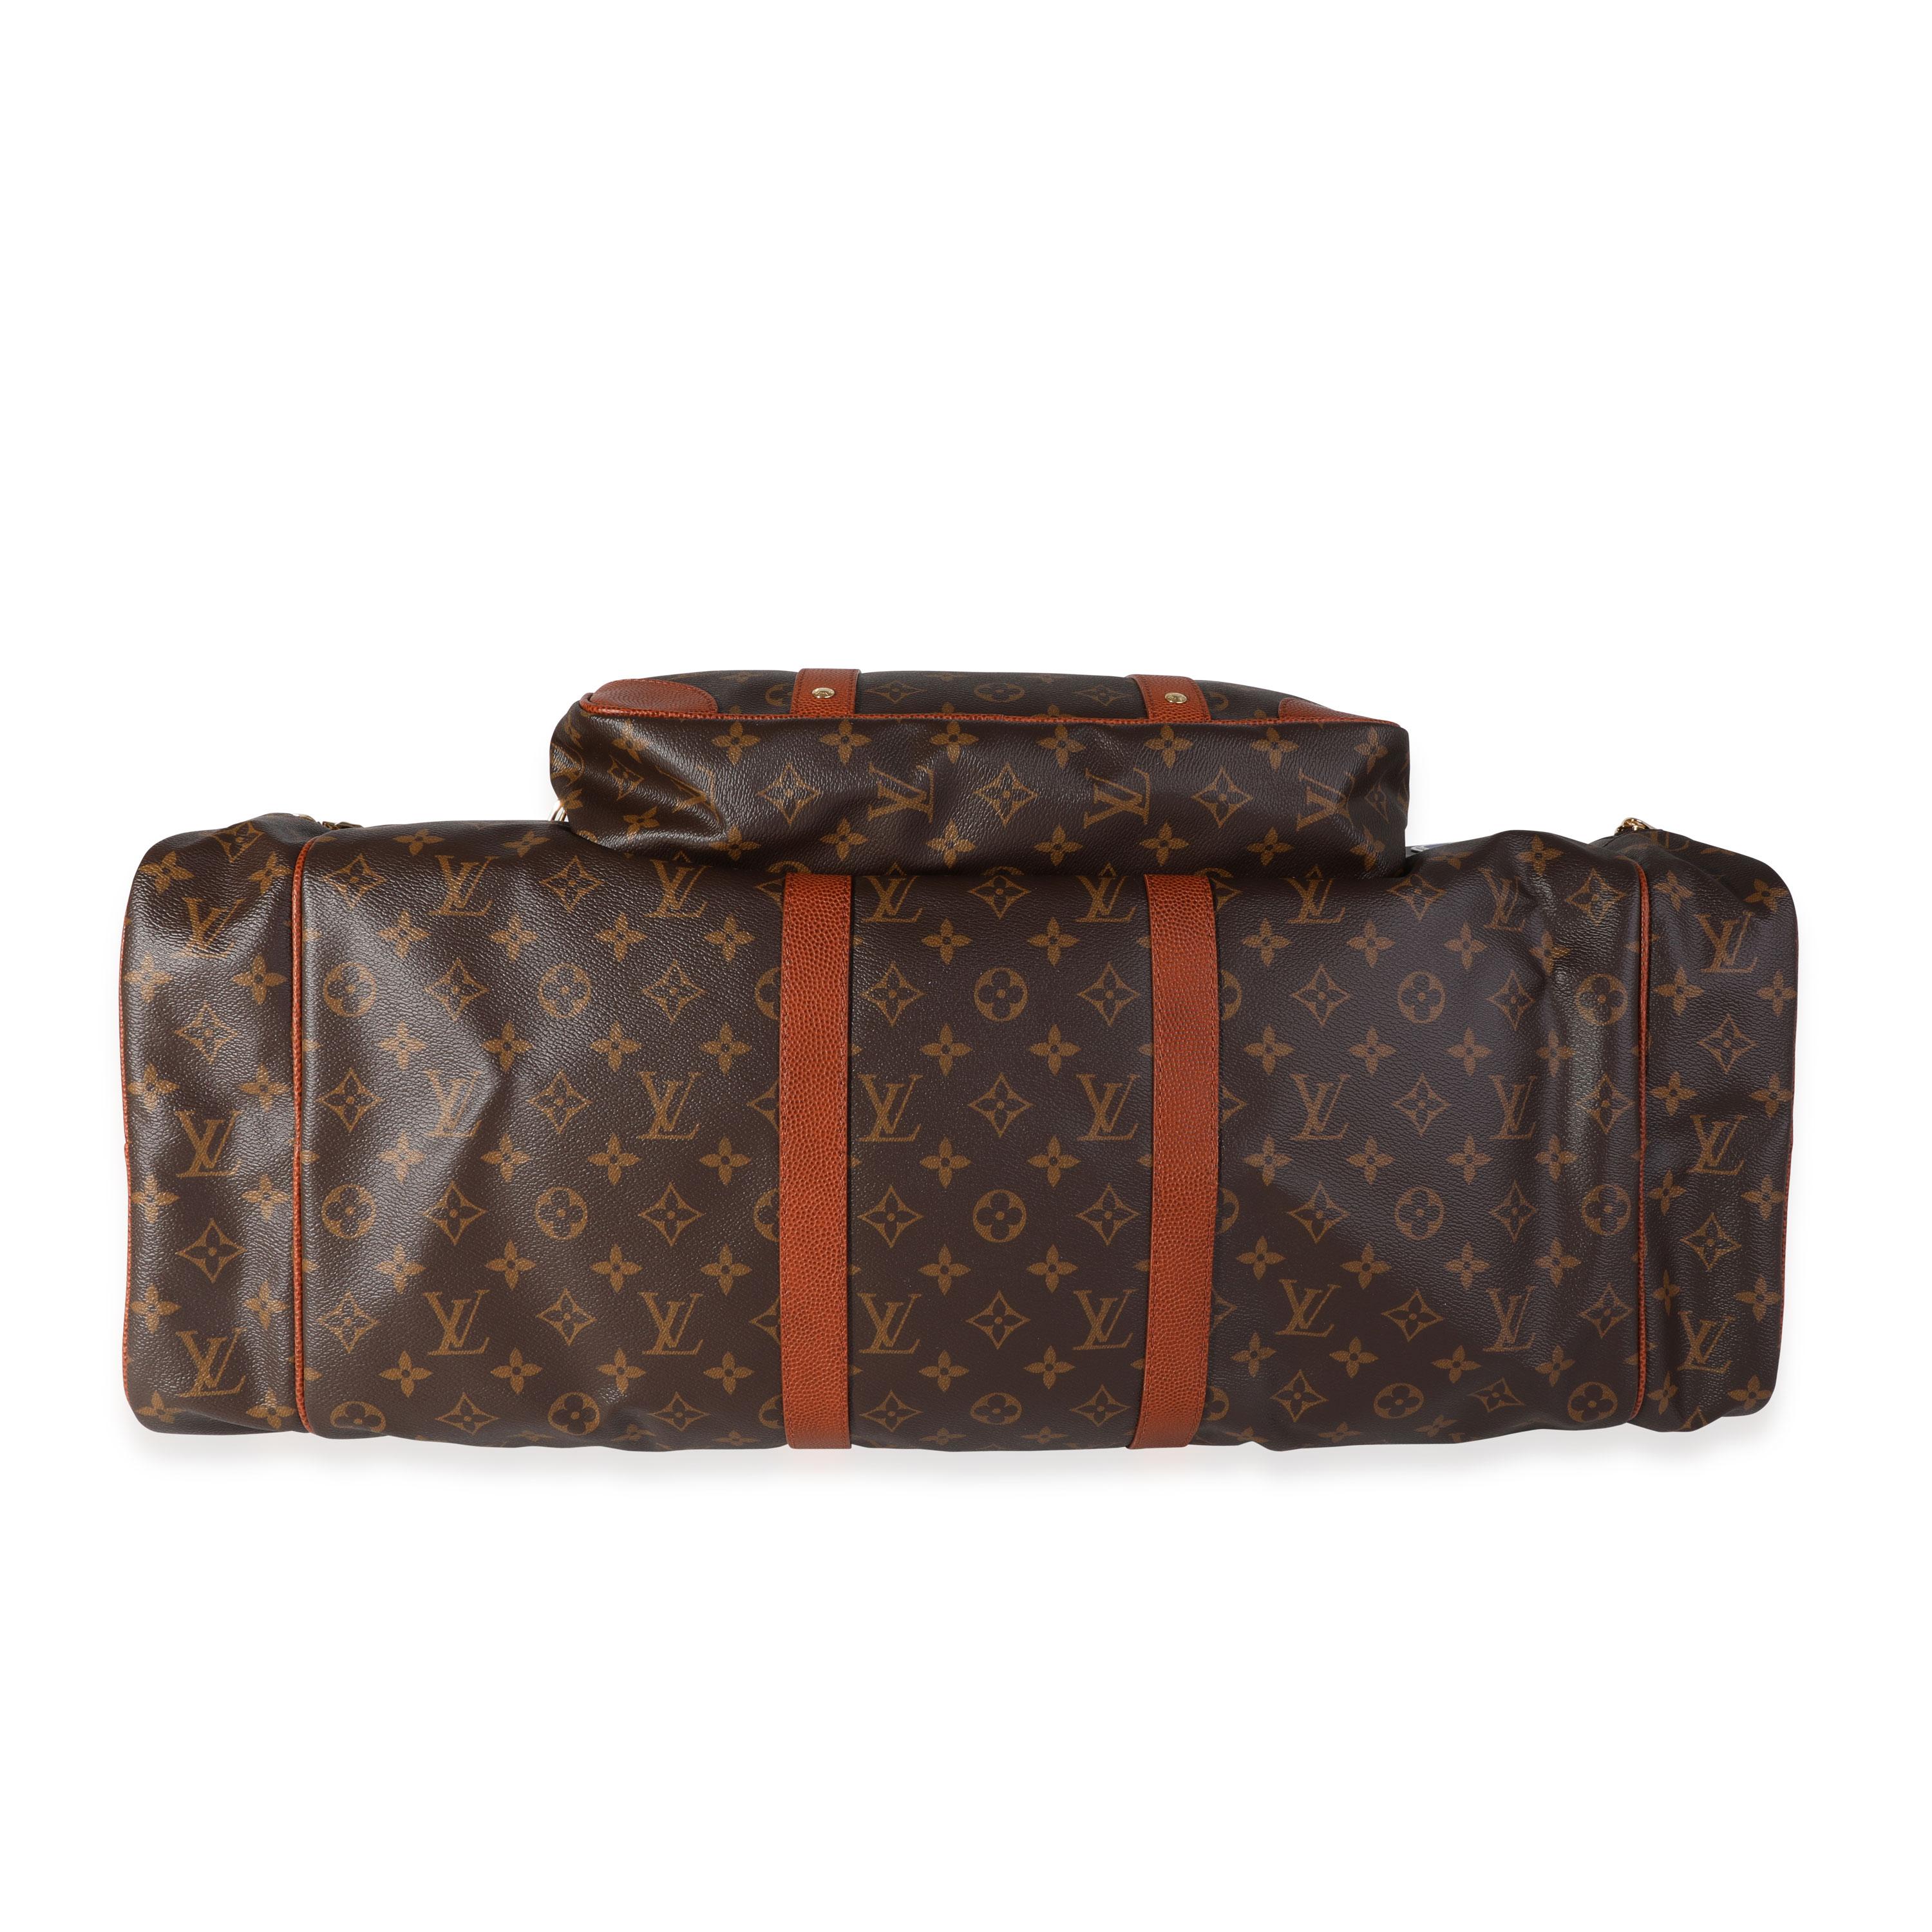 Louis Vuitton x NBA Monogram Canvas Trio Pocket Keepall In Excellent Condition For Sale In New York, NY